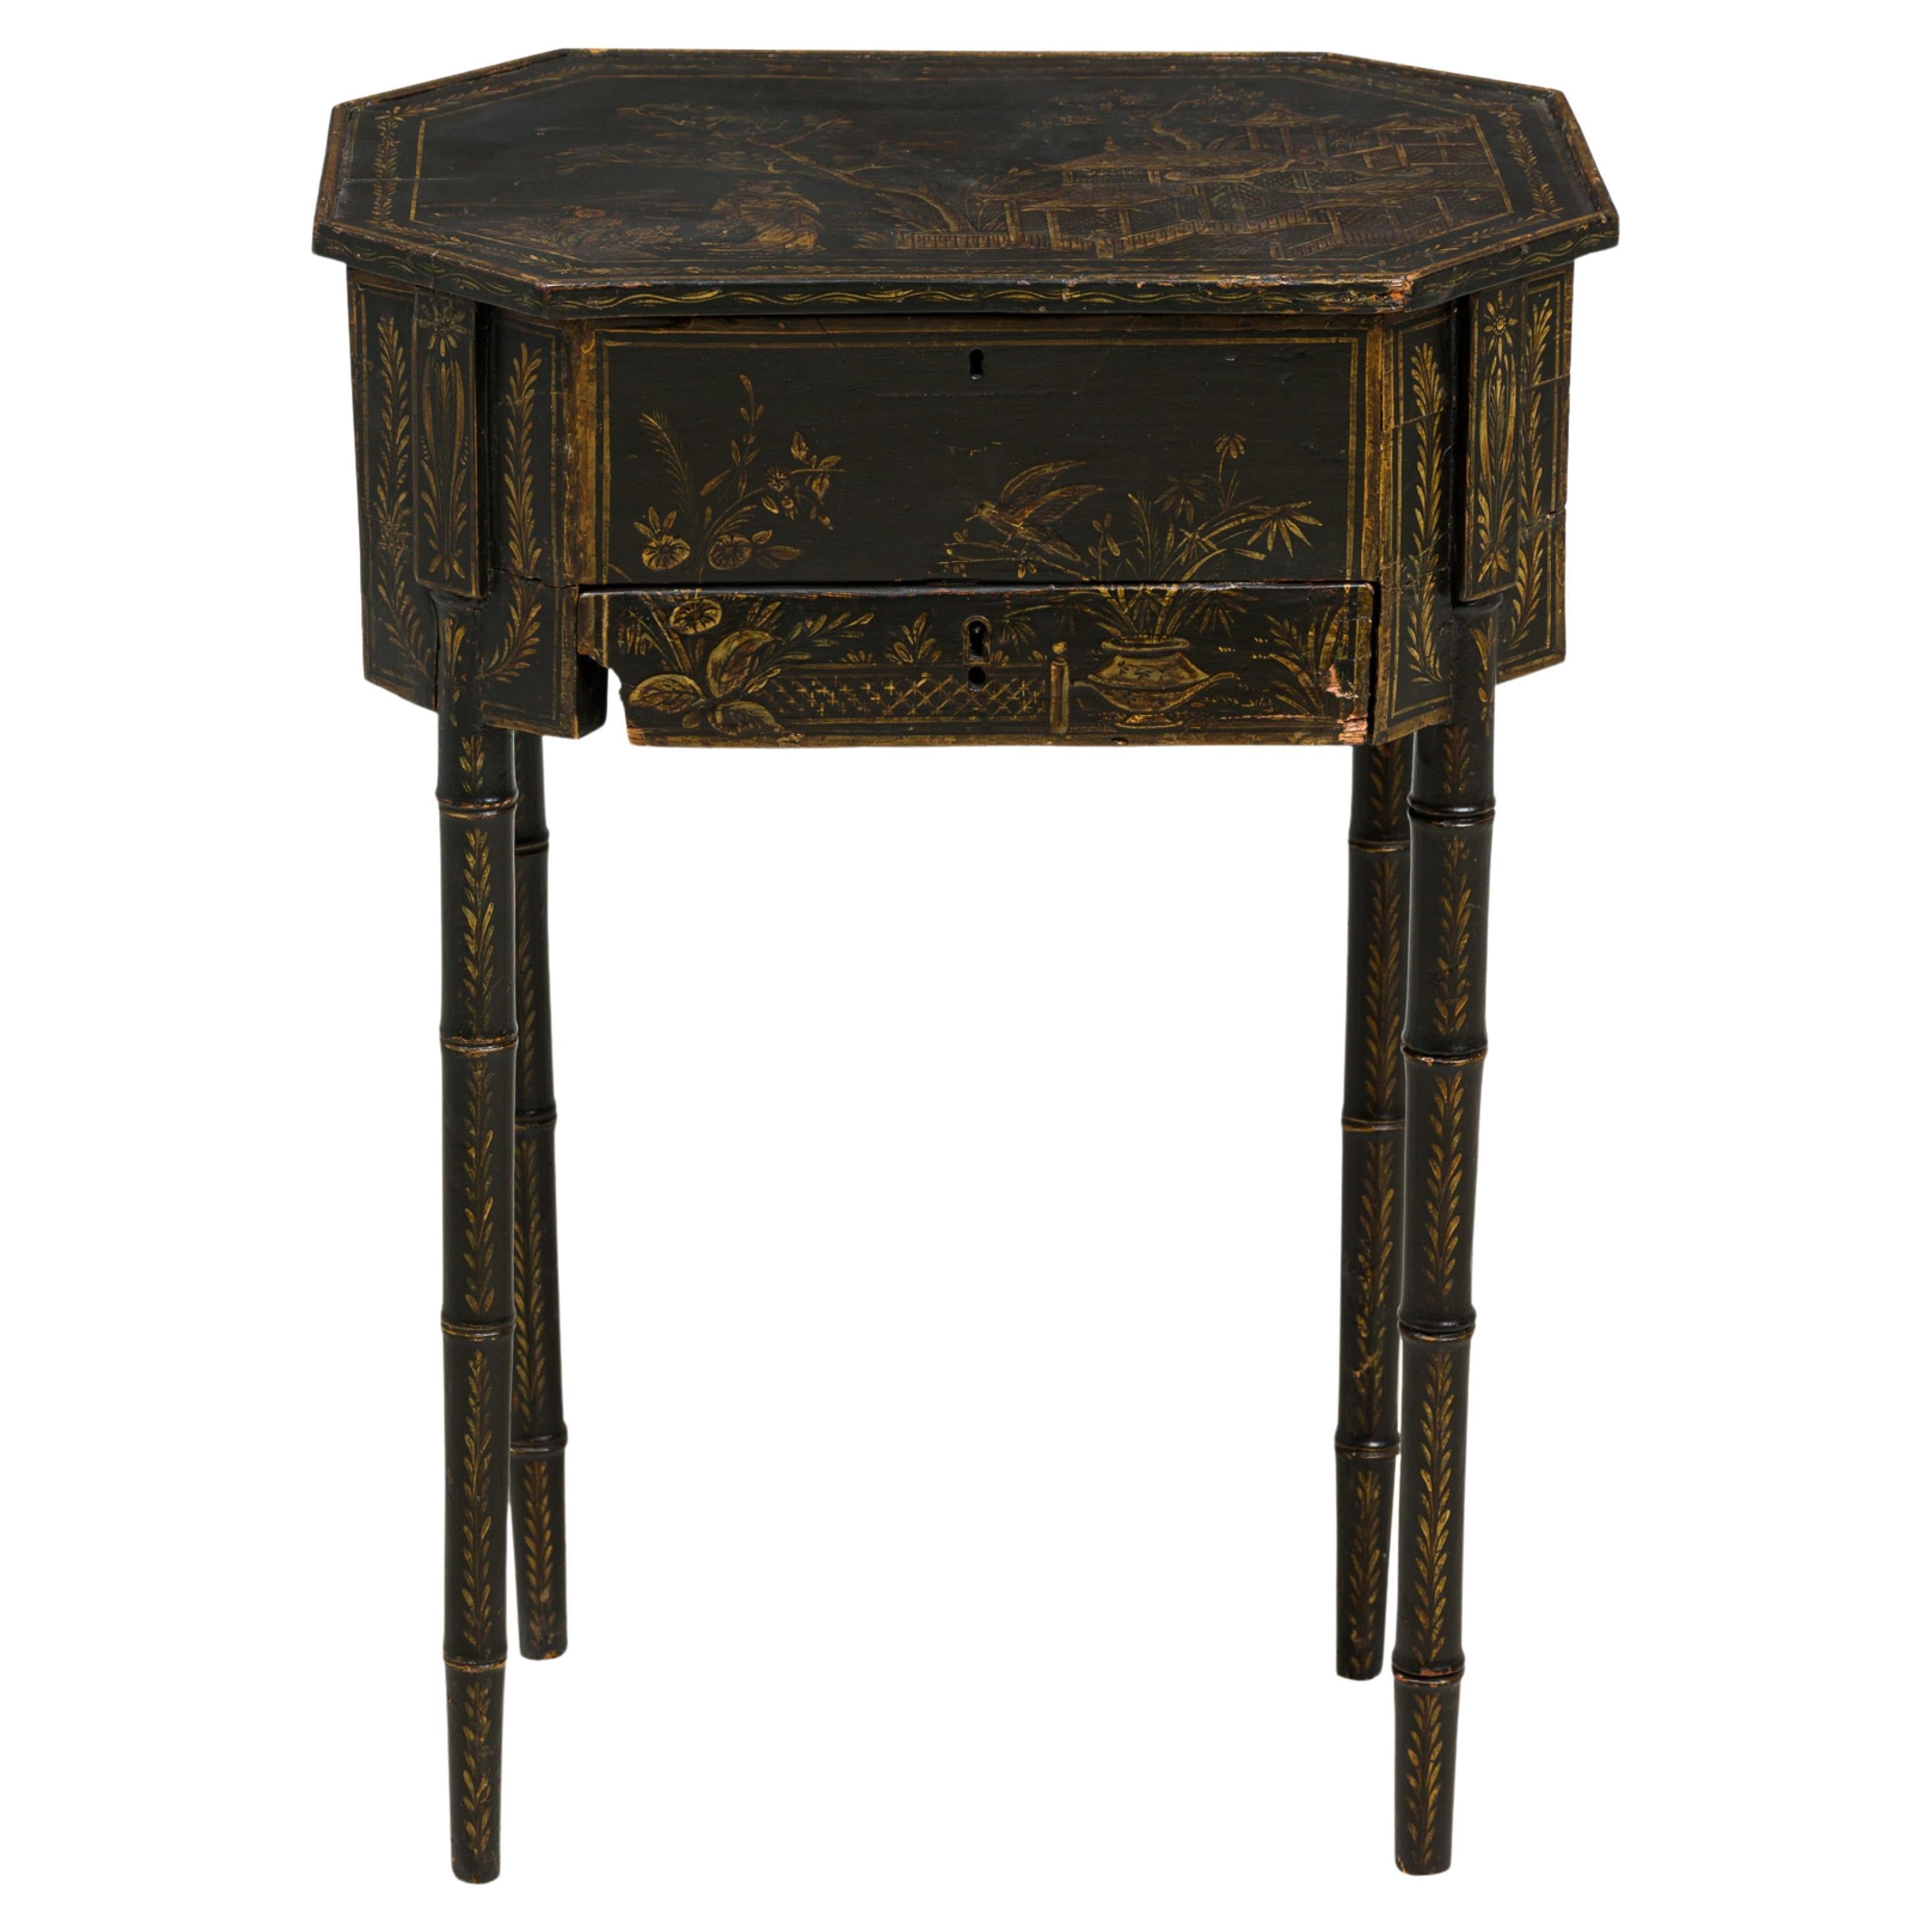 English George III Black Japanned Multi-Compartment Work End Side Table